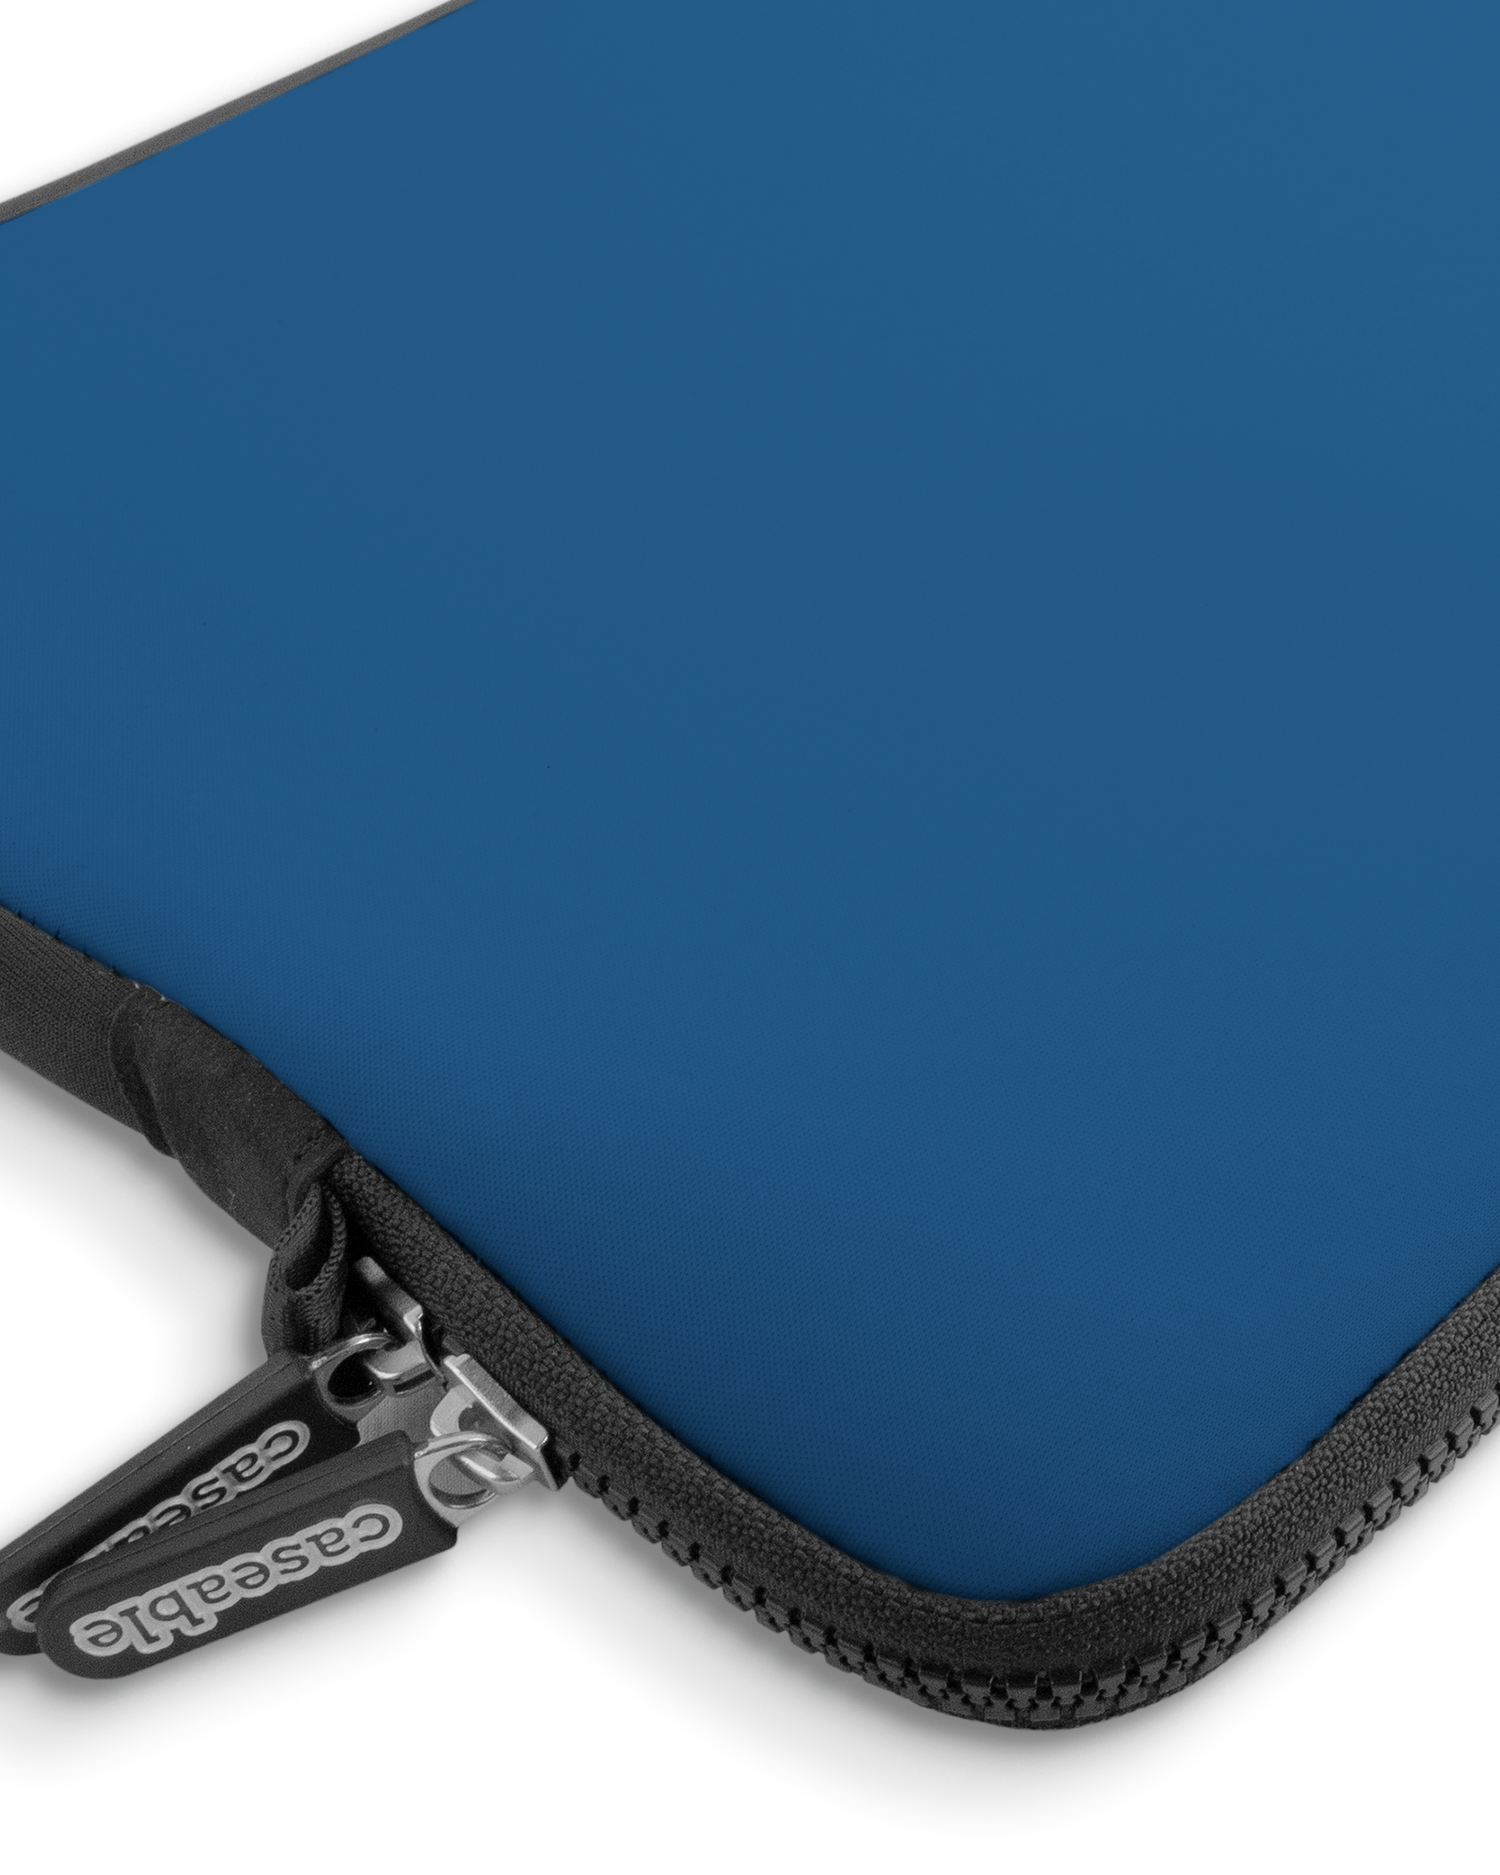 CLASSIC BLUE Premium Laptop Bag 13-14 inch with device inside